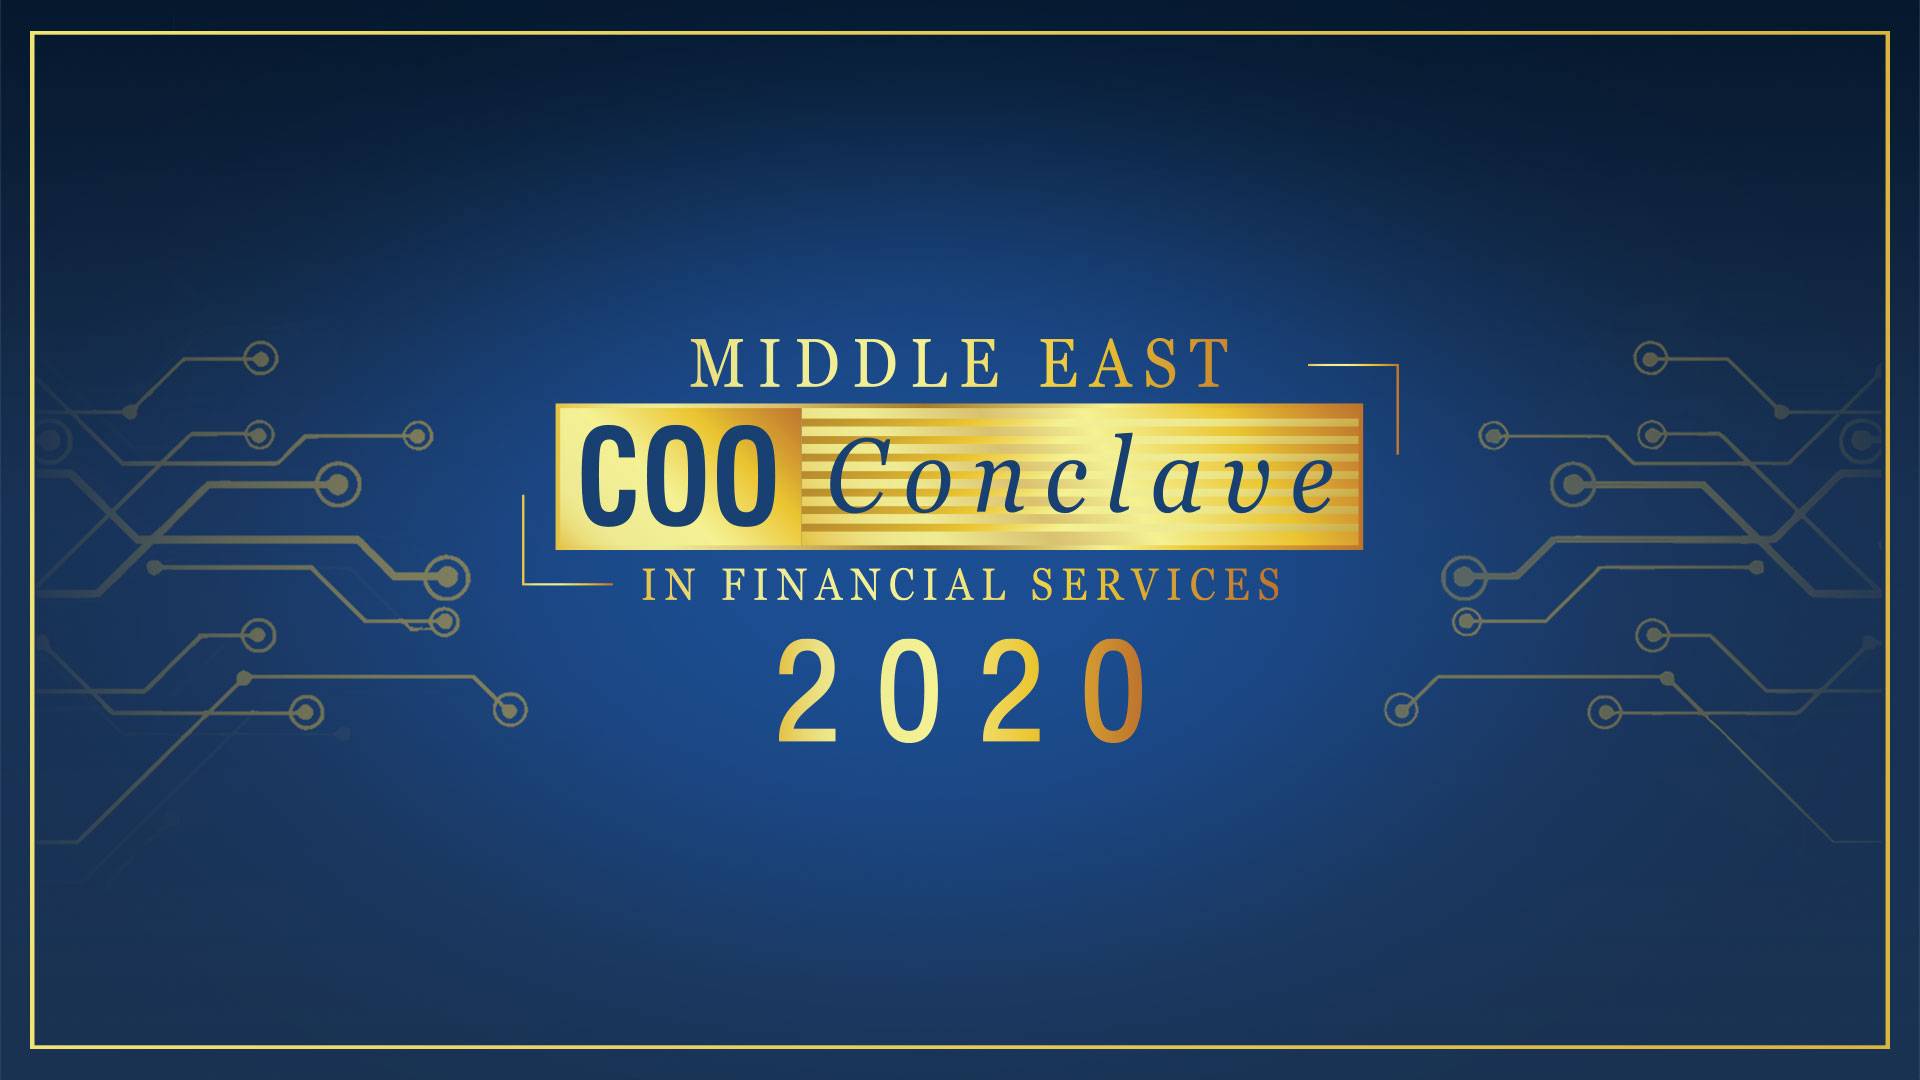 Middle East COO Conclave in Financial Services